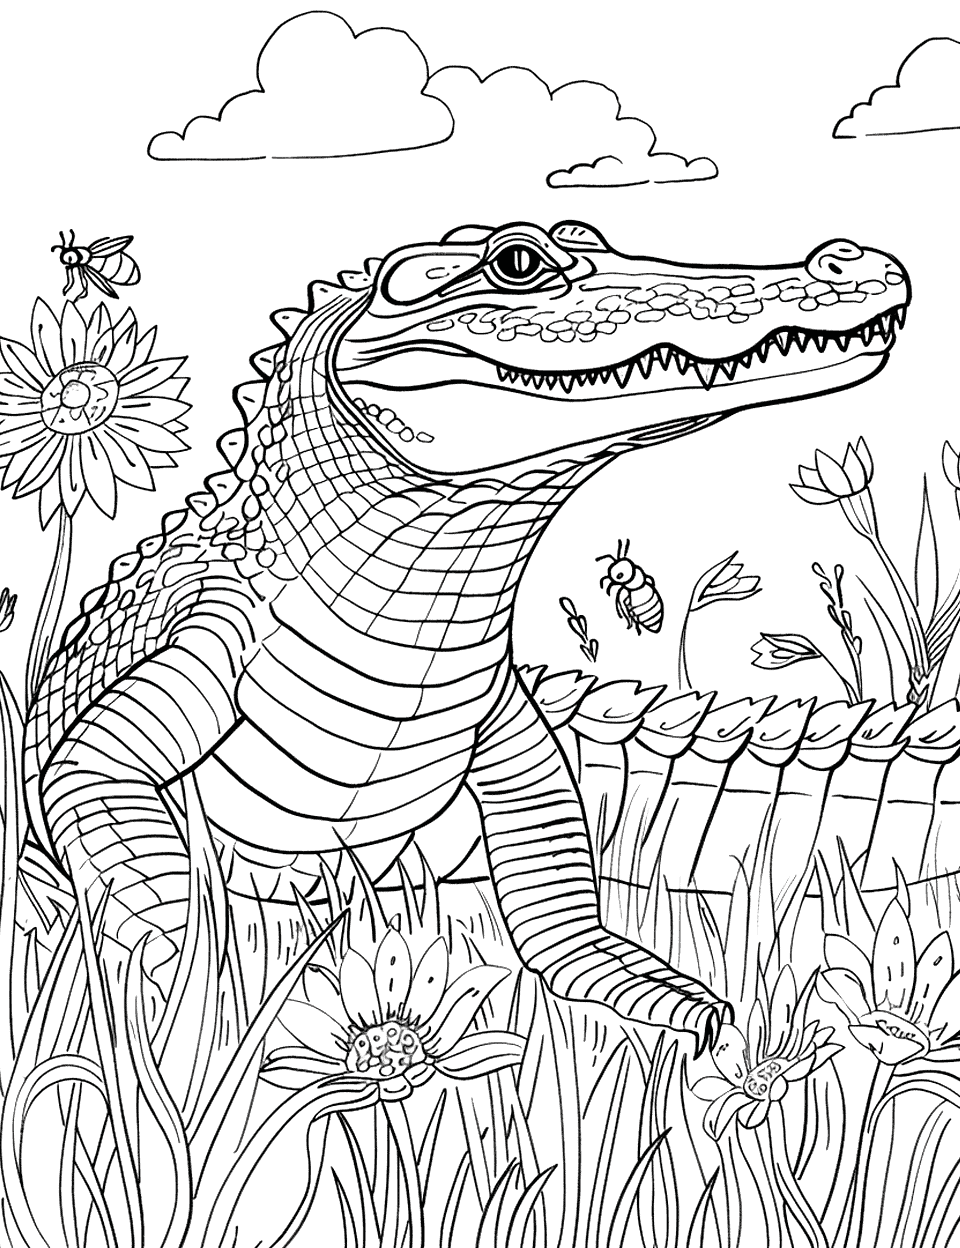 Crocodile in Spring Coloring Page - A crocodile surrounded by blooming flowers and buzzing bees in a spring meadow.